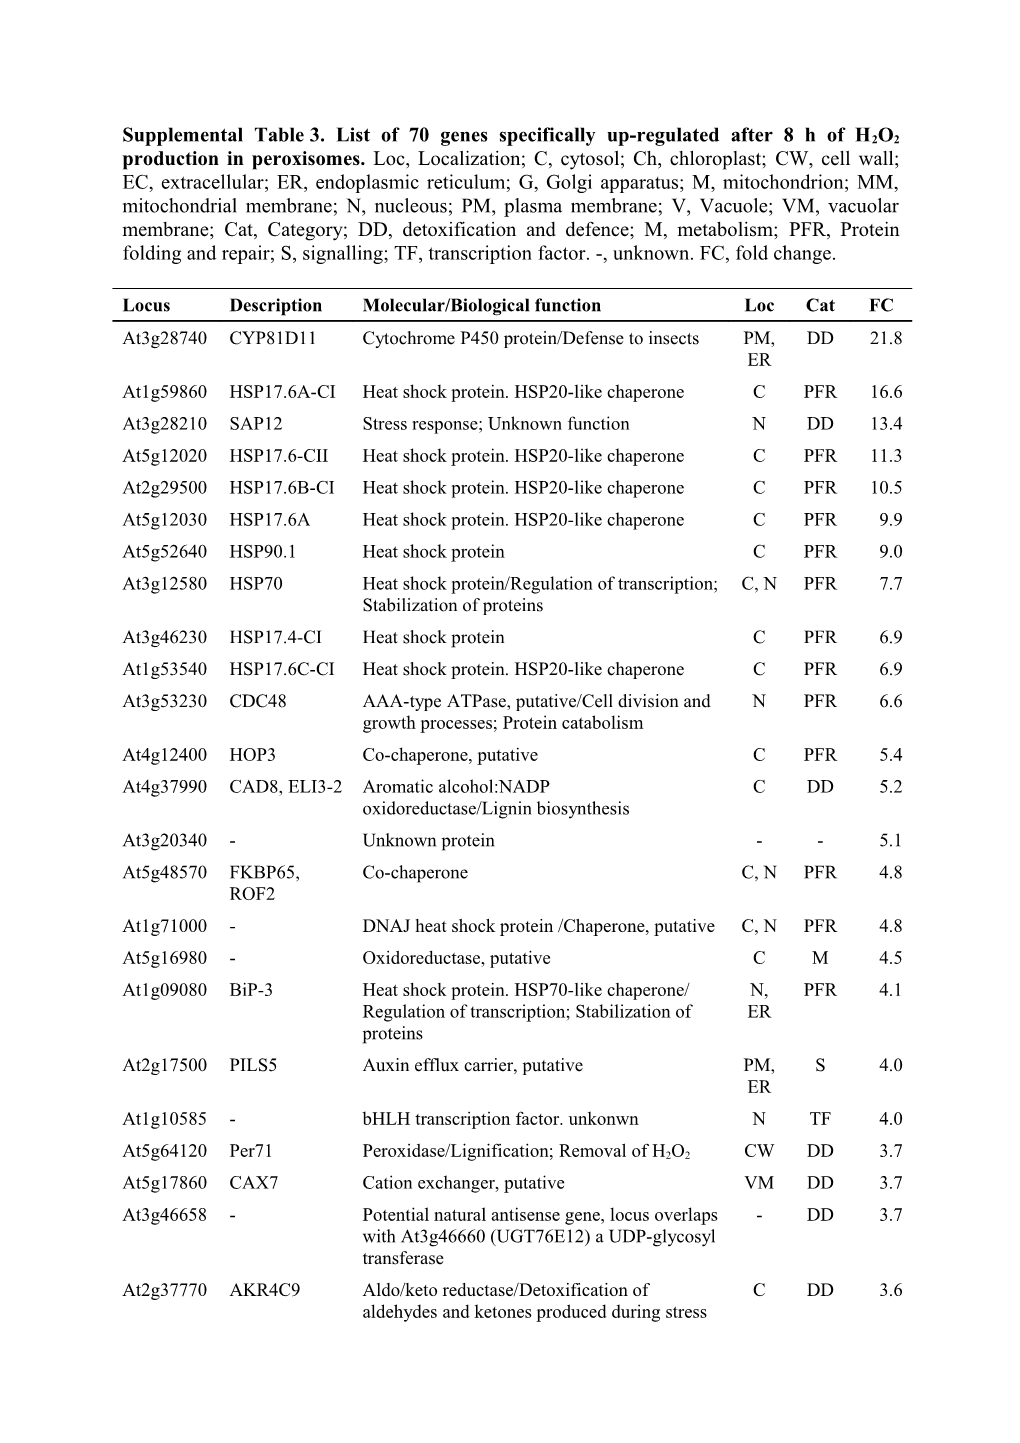 Supplemental Table3.List of 70 Genes Specifically Up-Regulated After 8 H of H2O2 Production